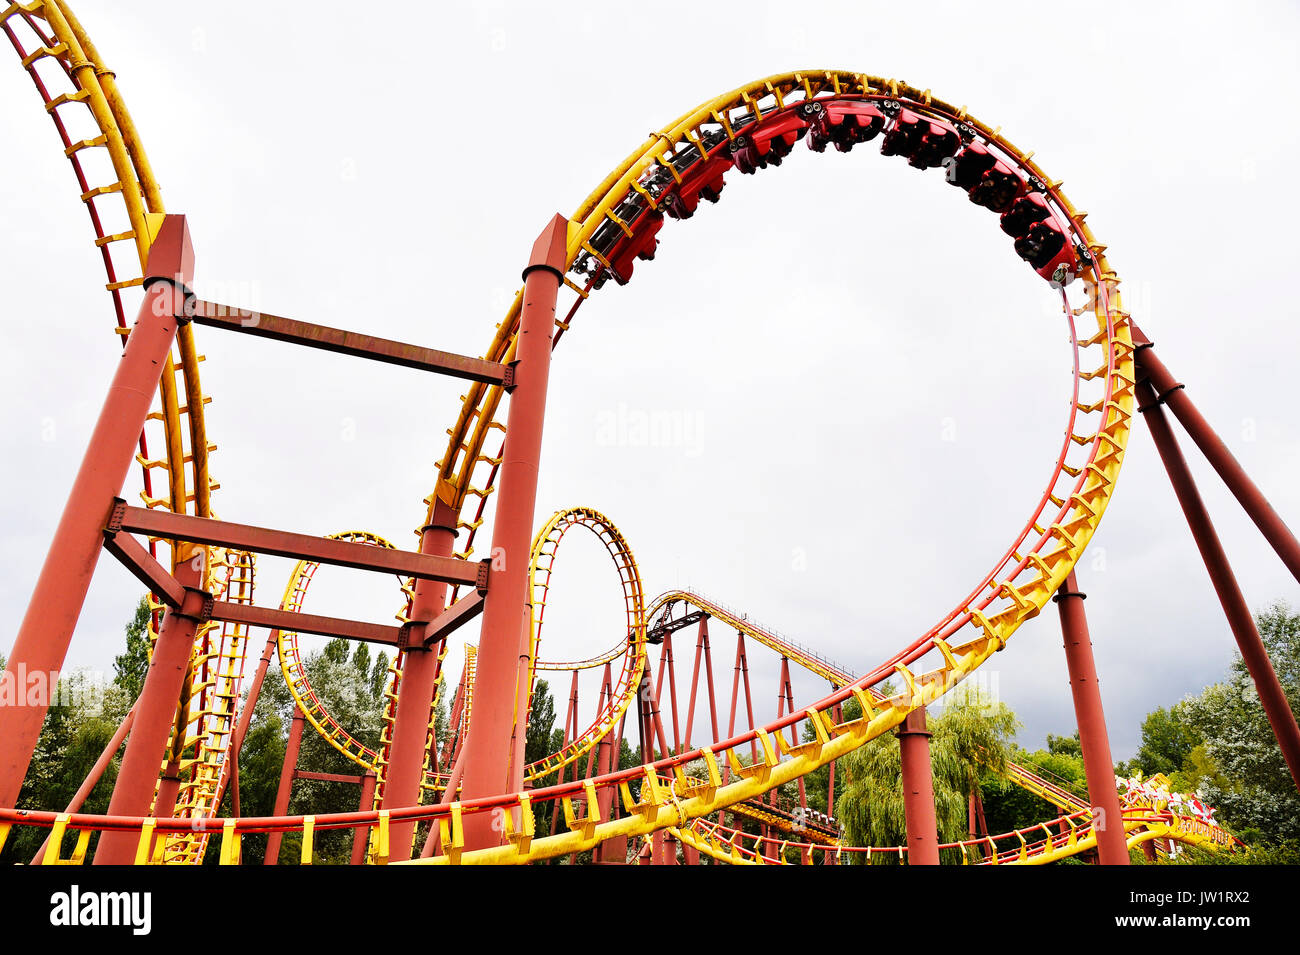 Parc asterix hi-res stock photography and images - Alamy